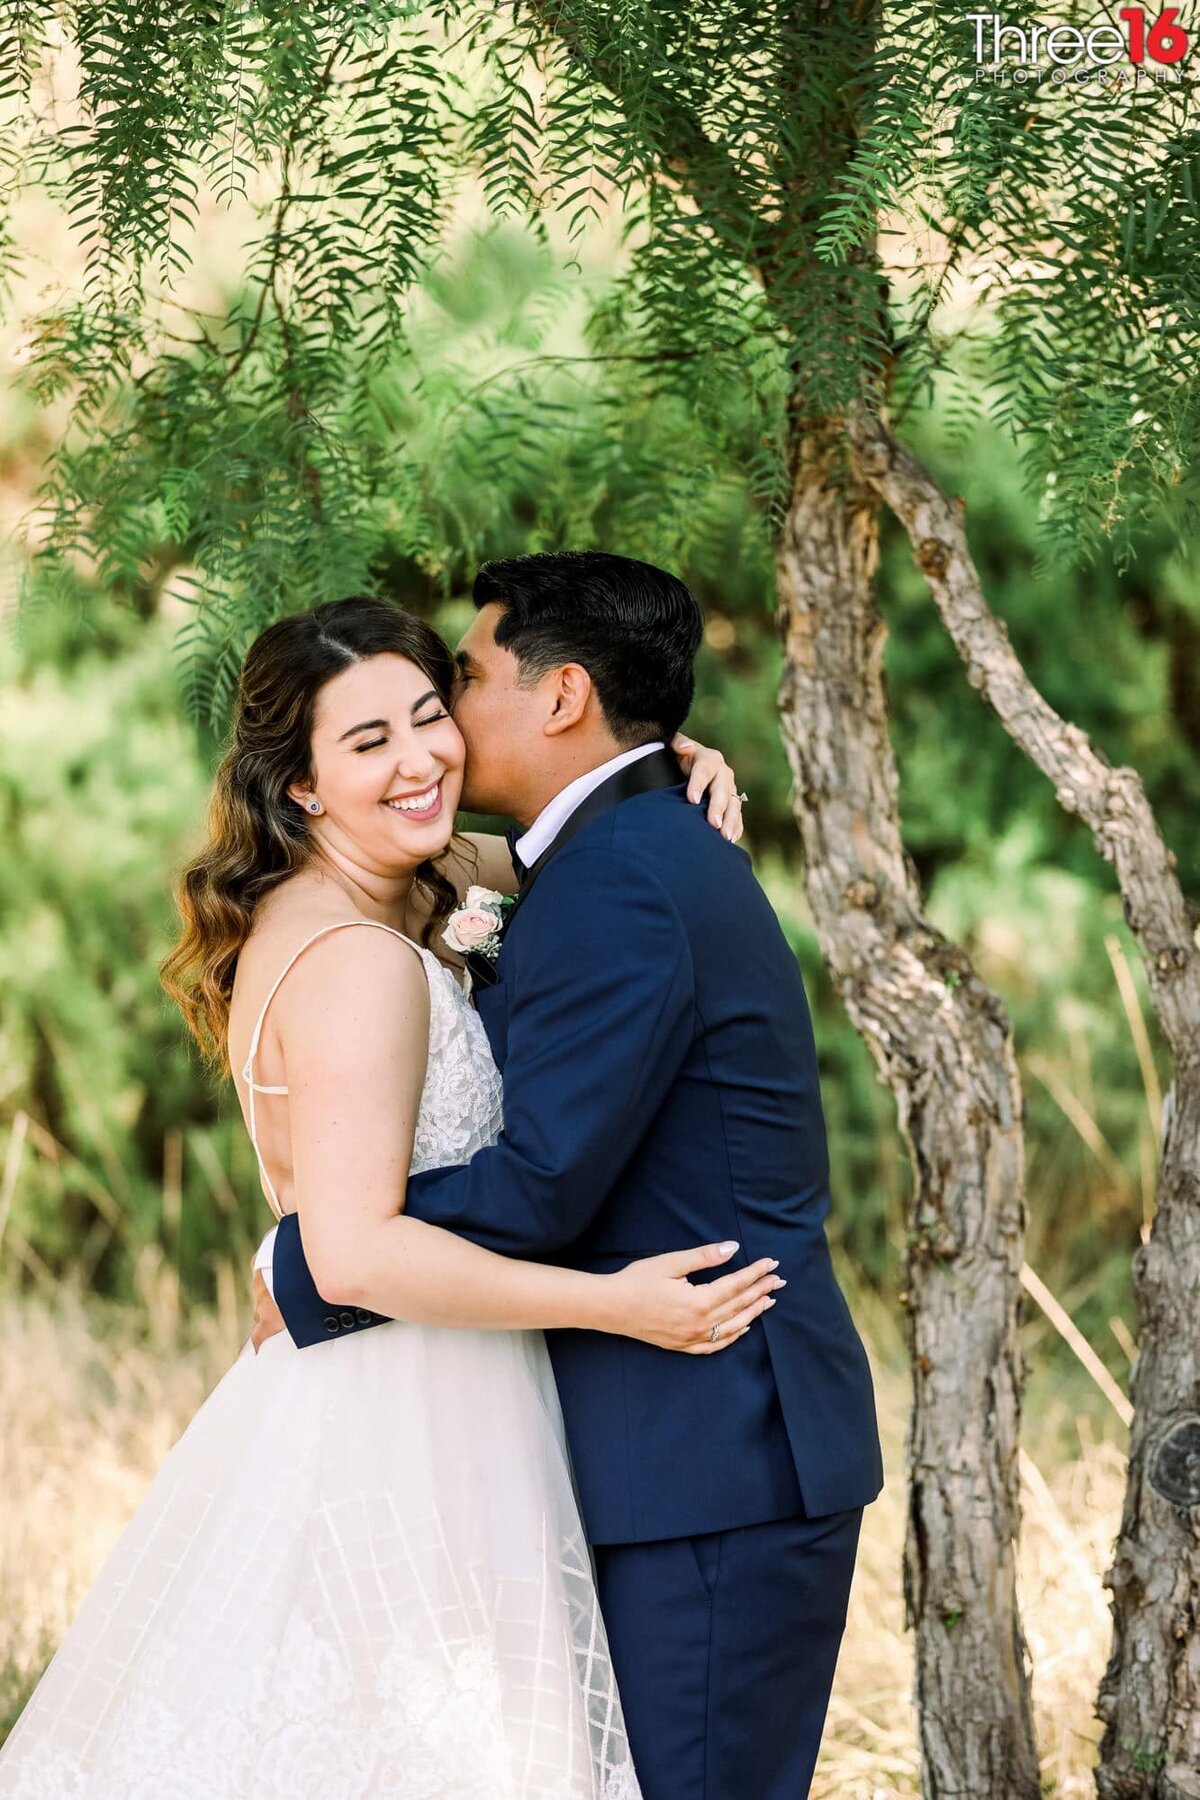 Groom whispers into his Bride's ear causing her to have a big smile as the hold each other